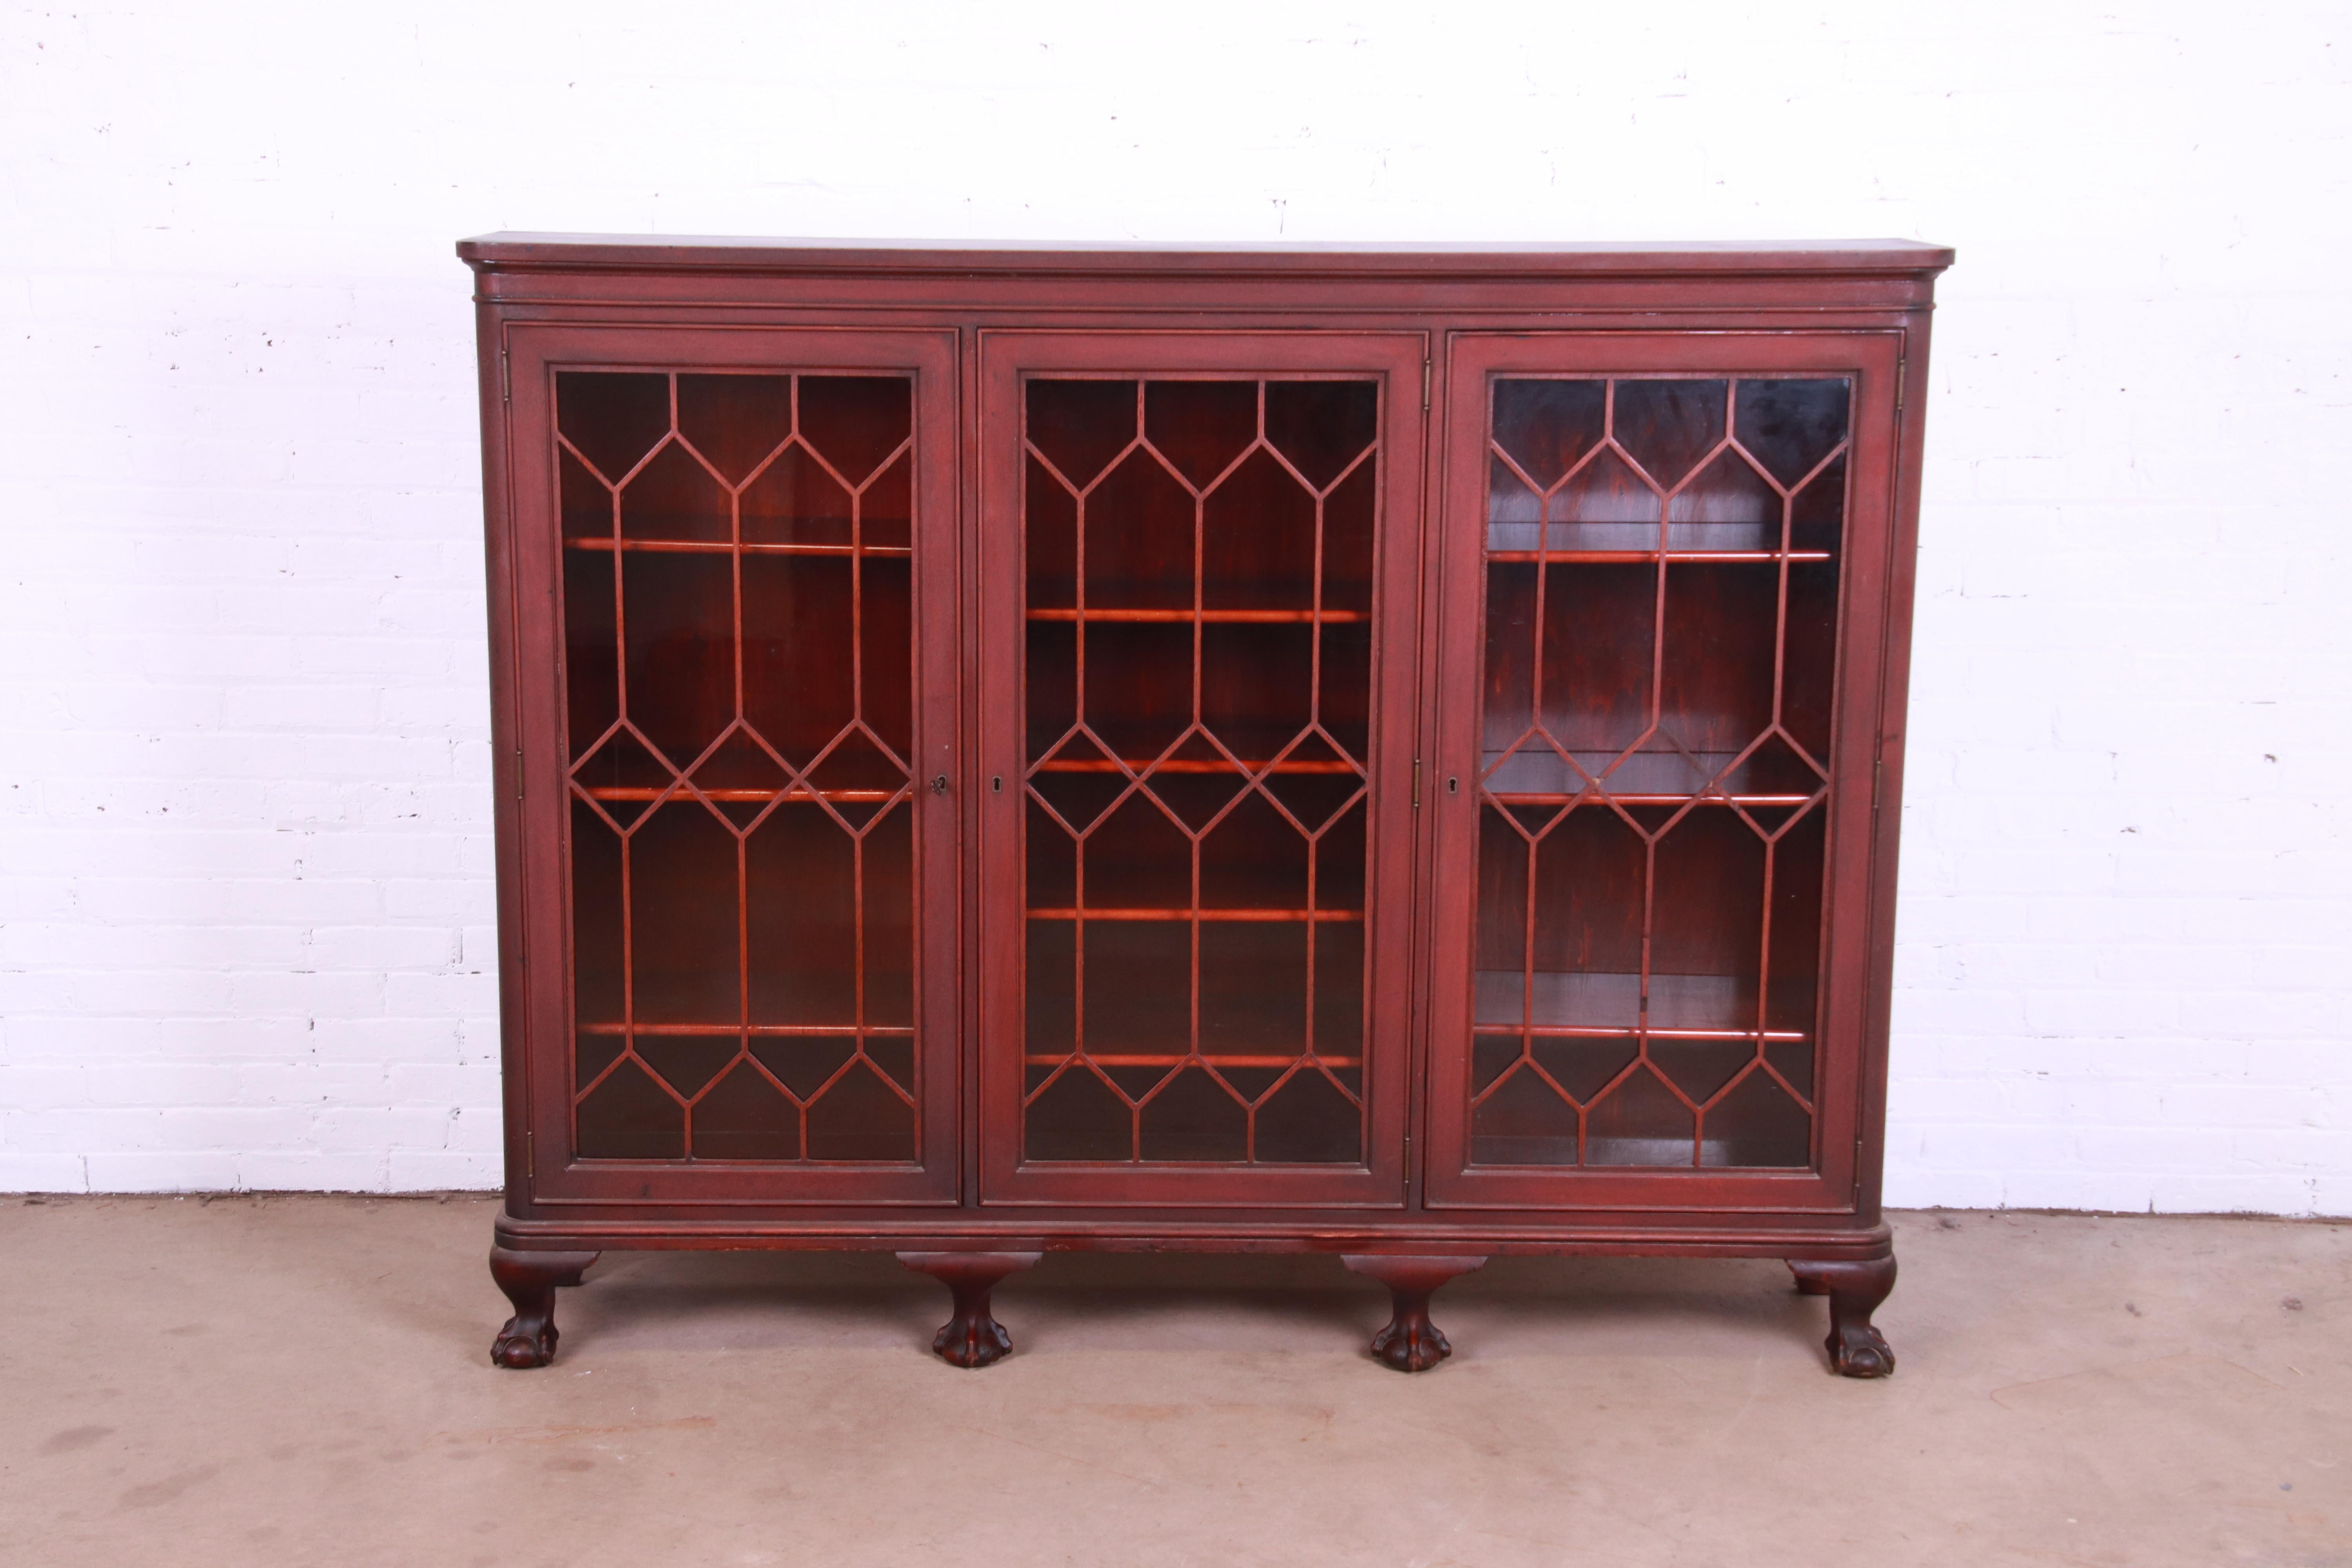 A gorgeous antique Chippendale style triple bookcase cabinet

USA, Circa 1900

Carved mahogany, with mullioned glass front doors. Cabinets lock, and key is included.

Measures: 70.25